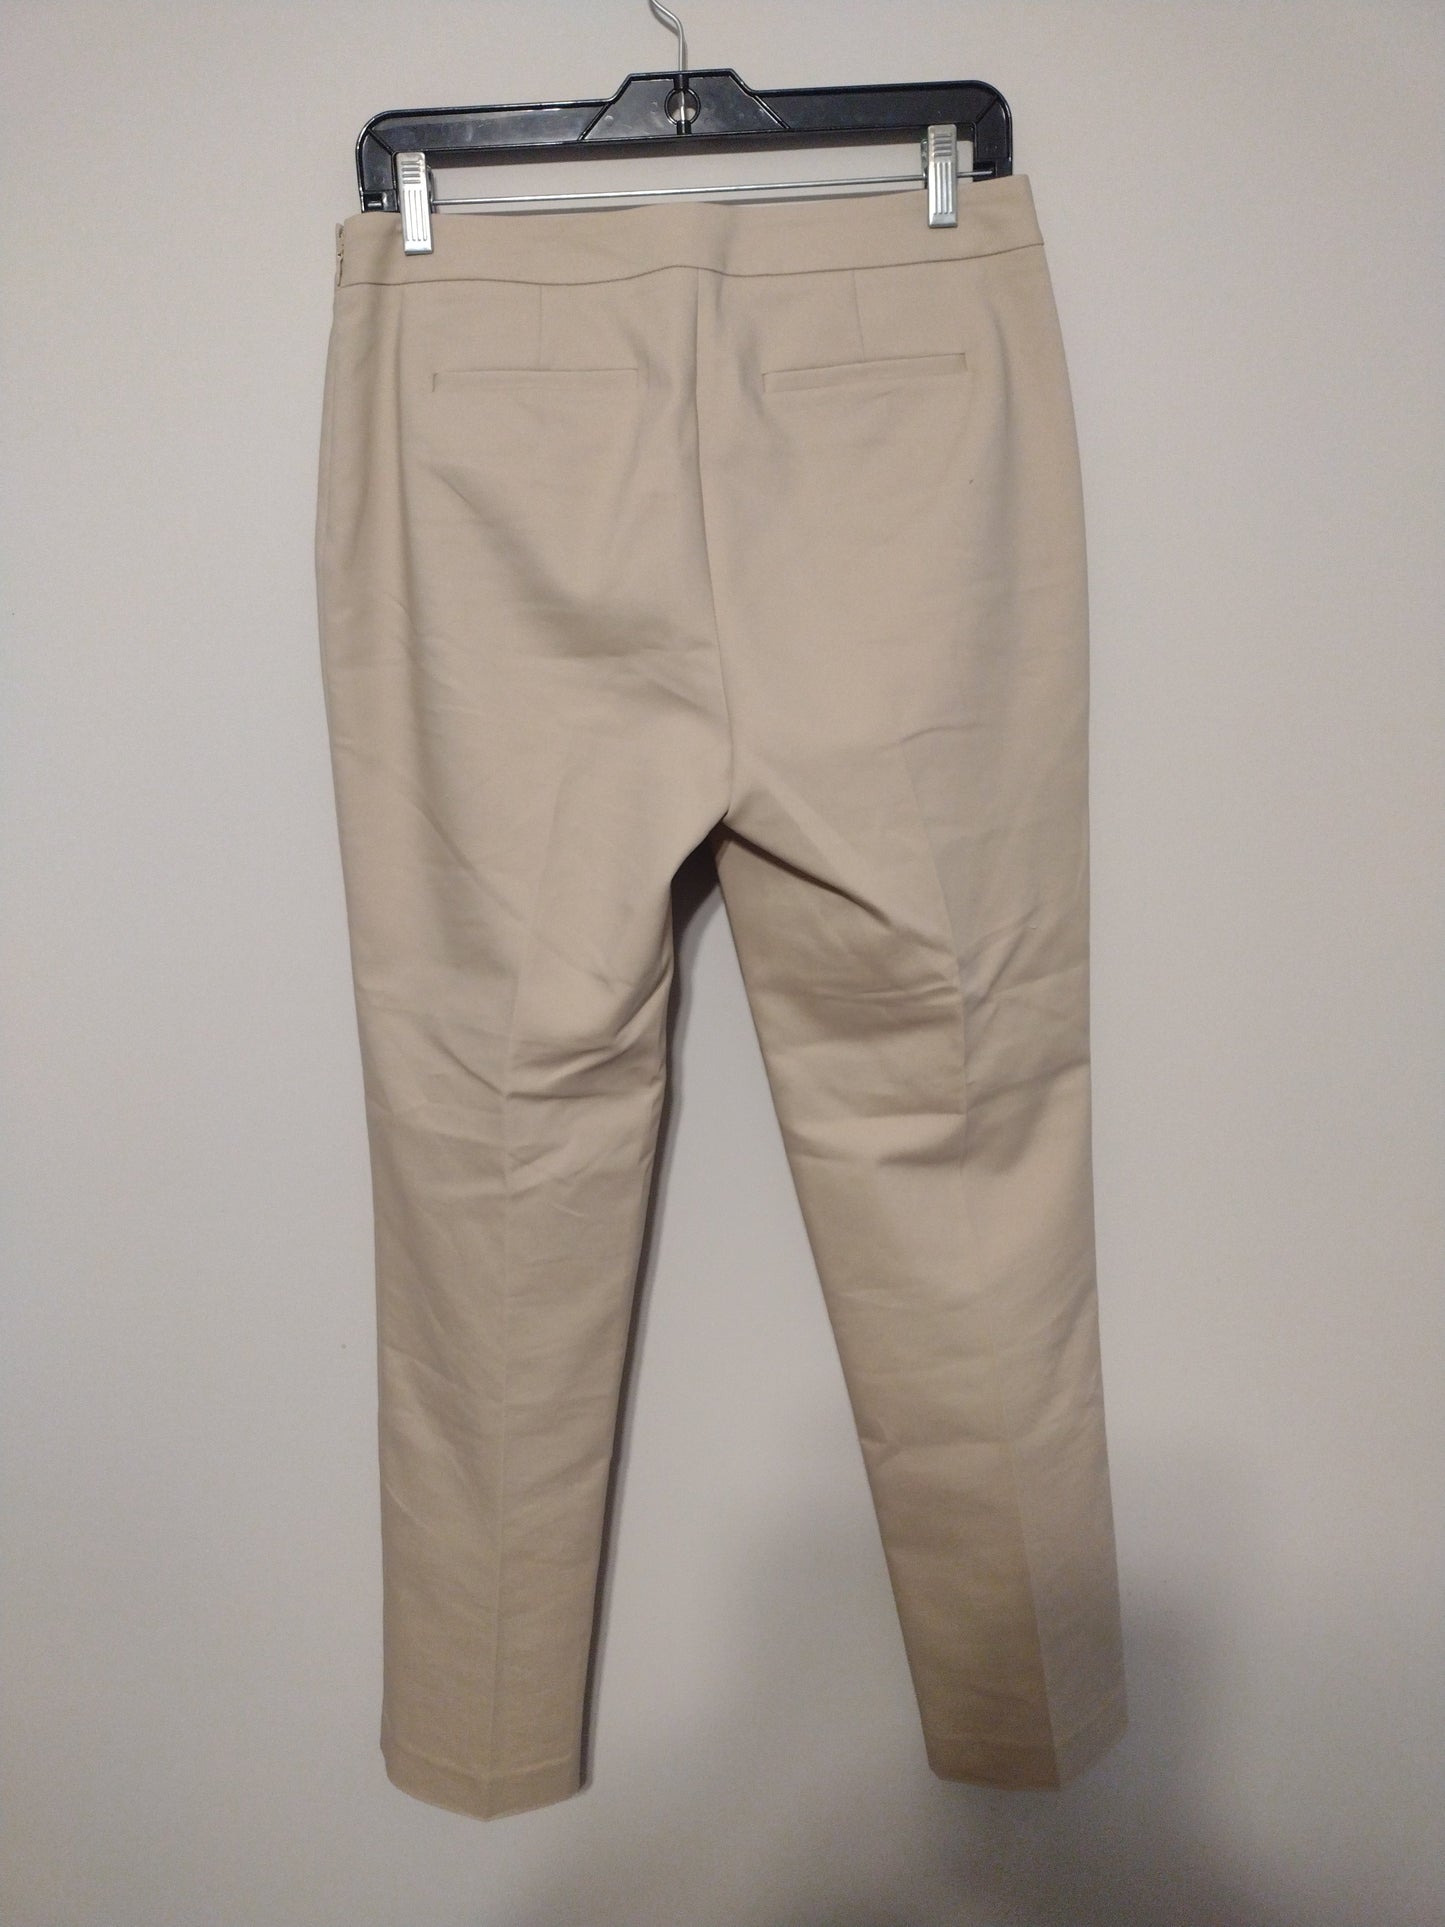 Pants Ankle By Chaus  Size: 4